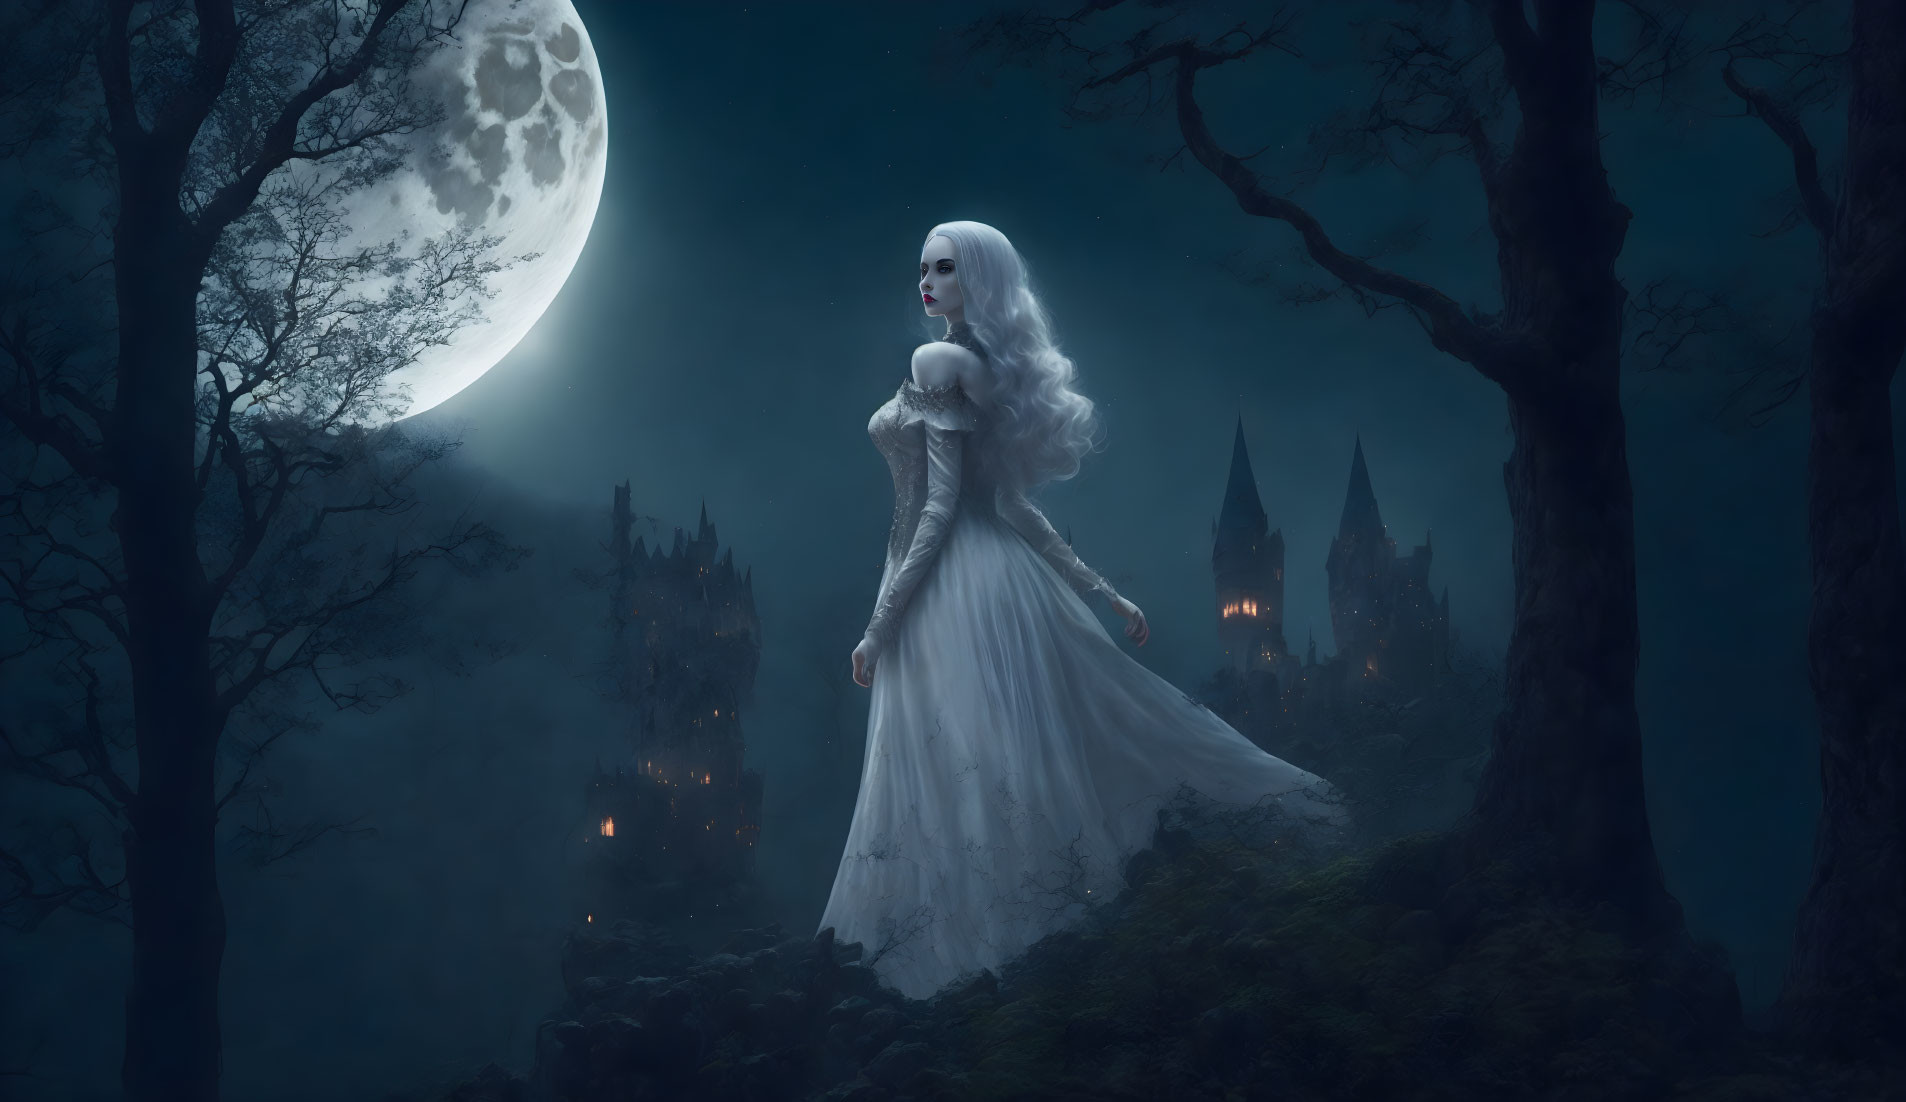 Pale woman in white dress in gloomy forest with full moon and distant castle